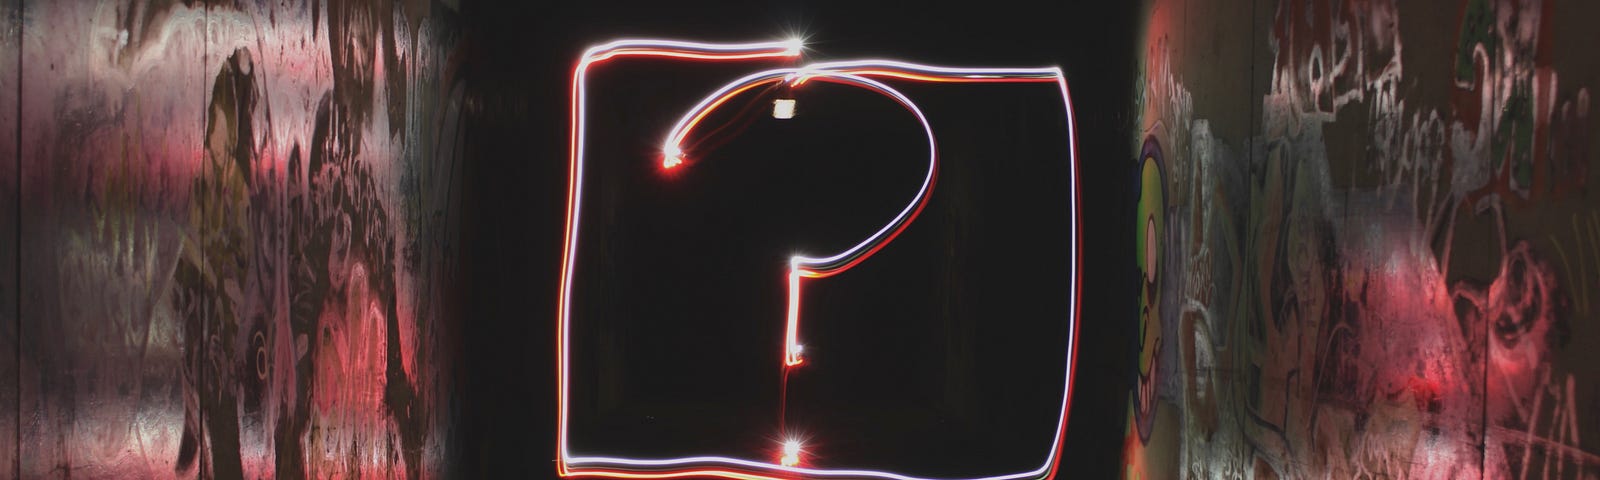 A picture of a neon lit question mark at the end a dark corridor. Photo credit: Emily Morter on Unsplash